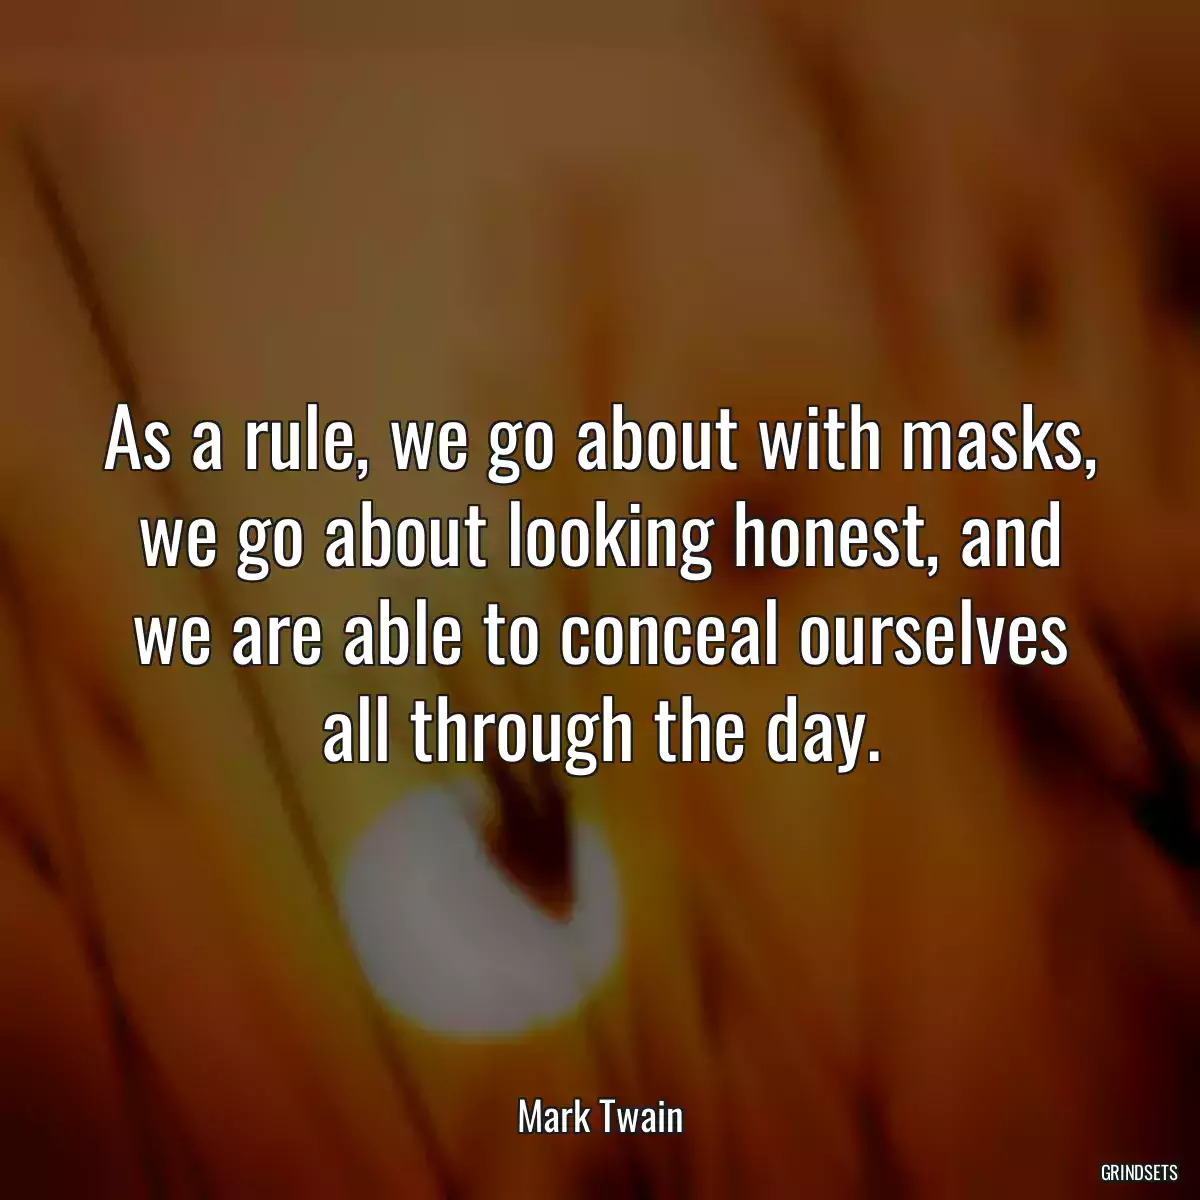 As a rule, we go about with masks, we go about looking honest, and we are able to conceal ourselves all through the day.